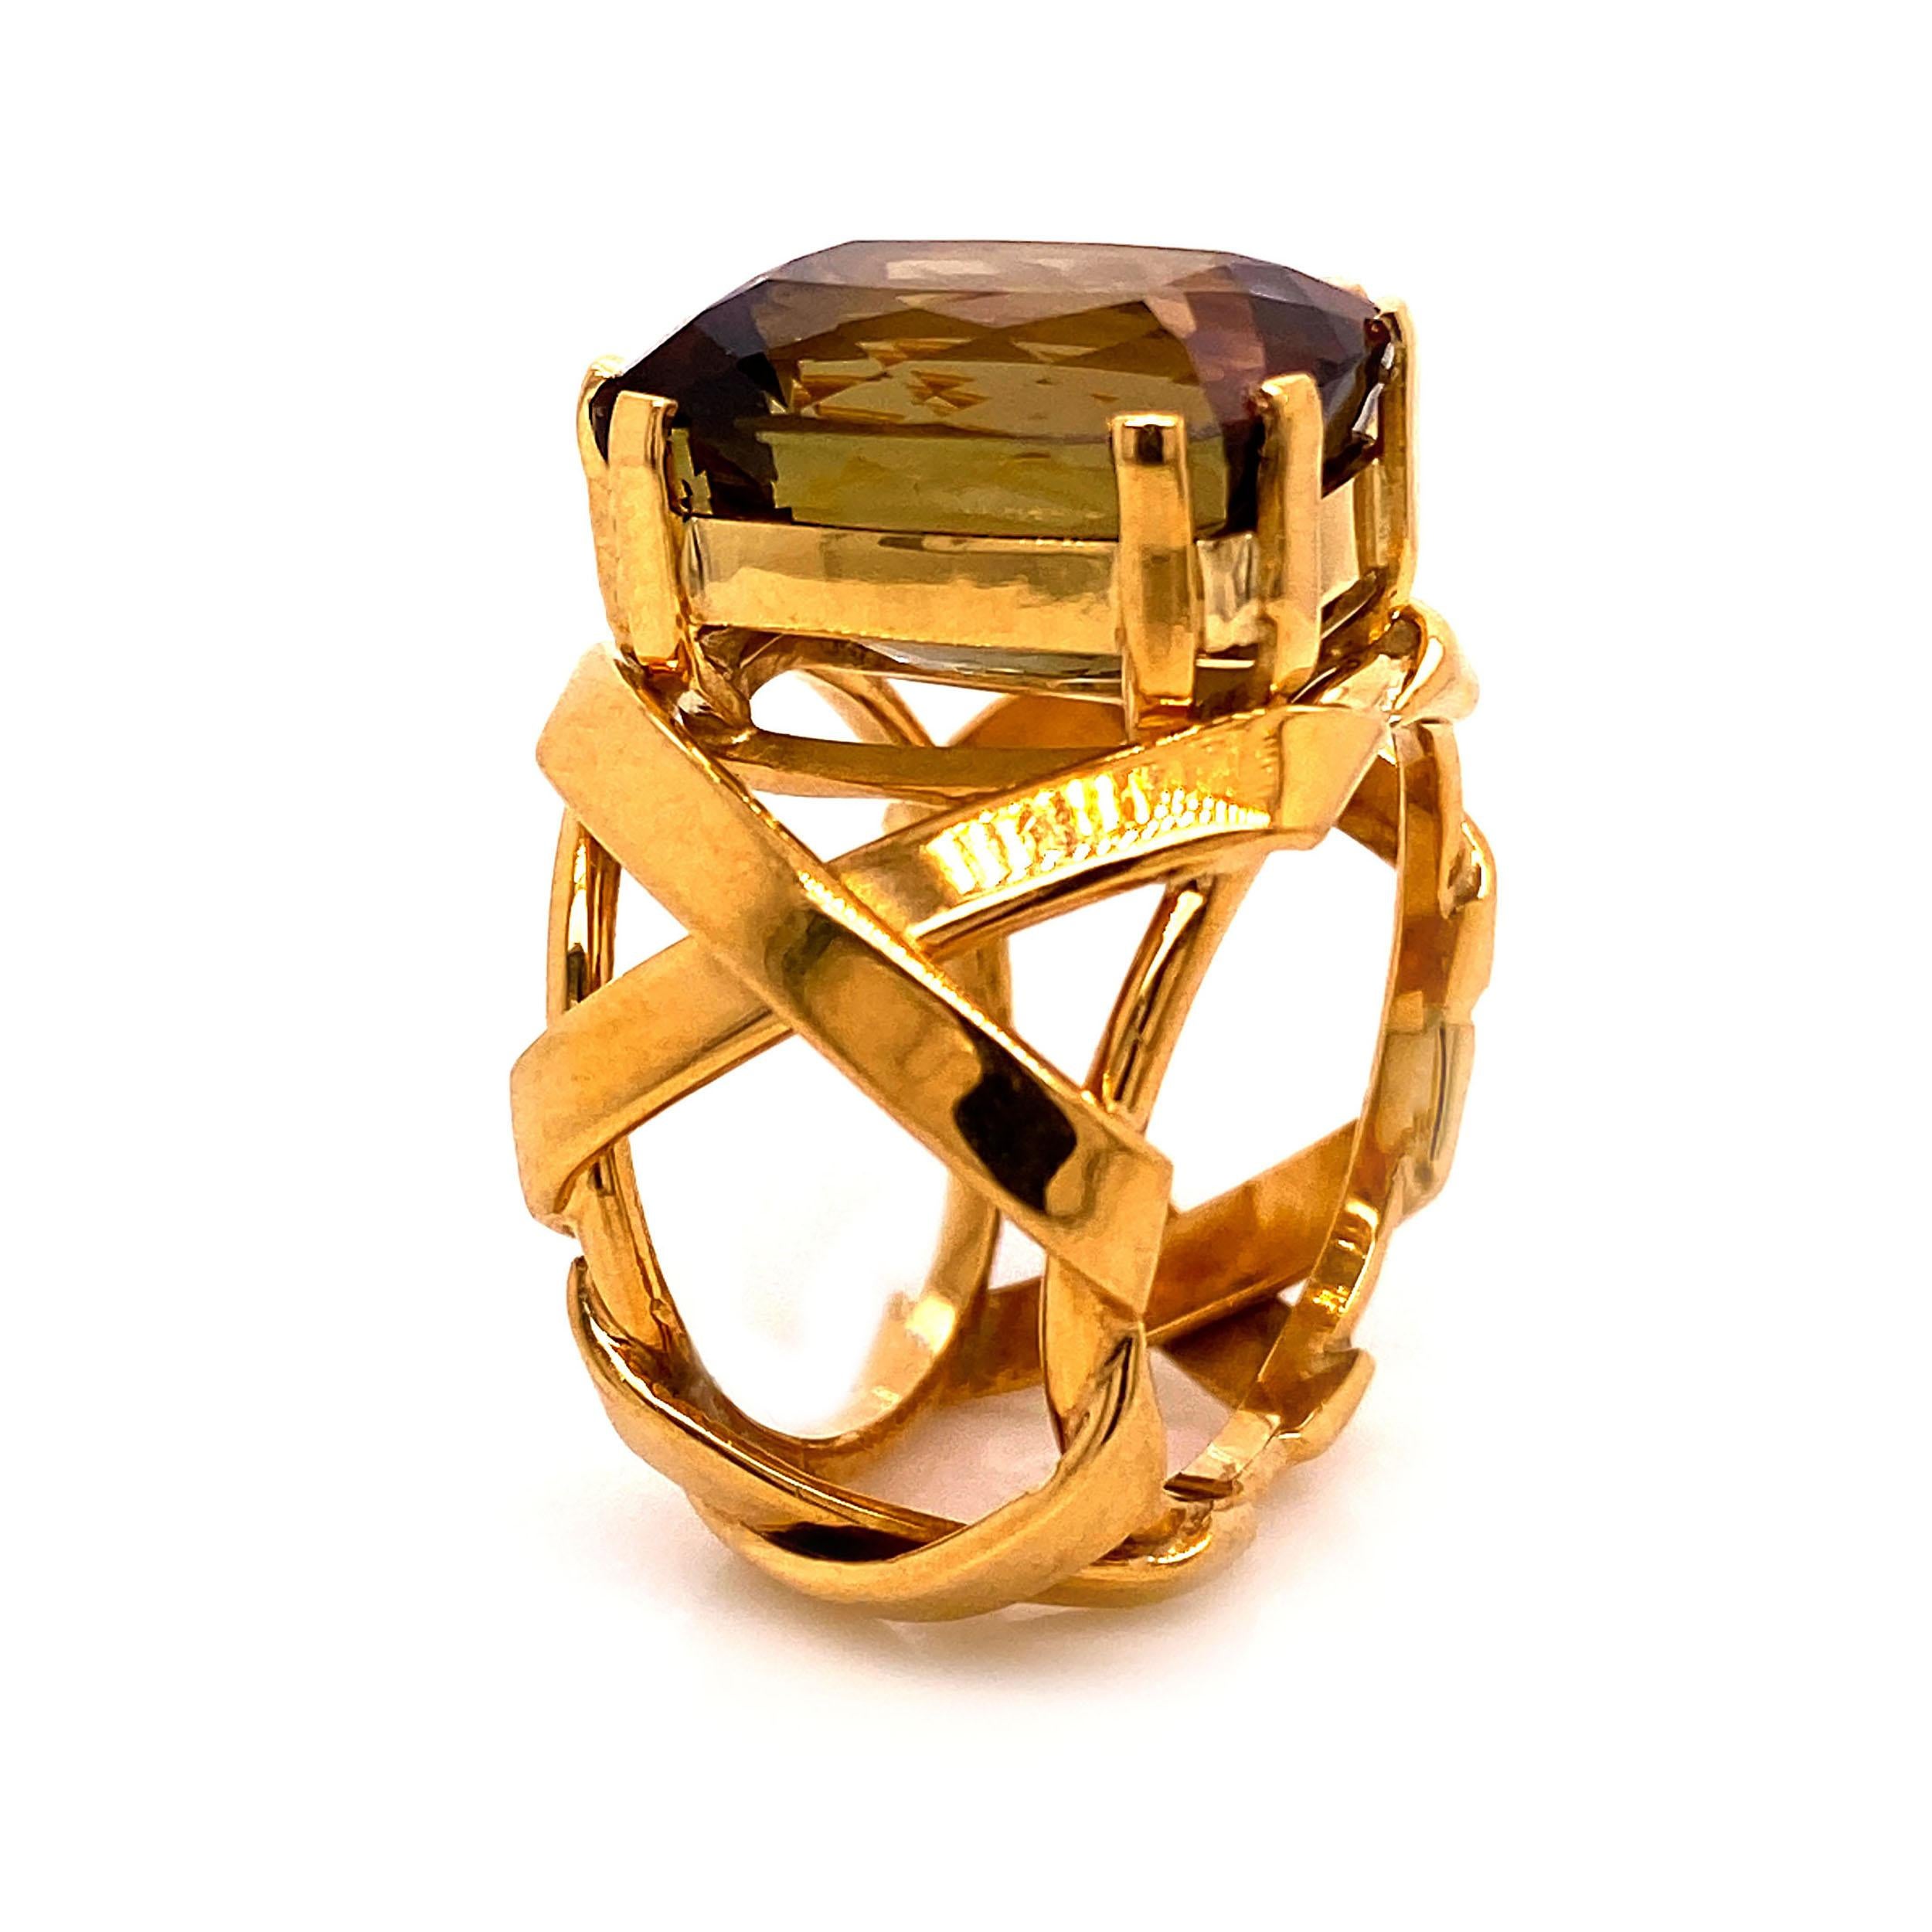 Perfect for Fall.  This Statement Ring of huge Andalusite, 15 X 10 MM, set on top of the ancient 'X' pattern in 18K rich yellow gold is a true show stopper.  Andalusite is strongly pleochroic and can show shades of green, brown, and red when viewed